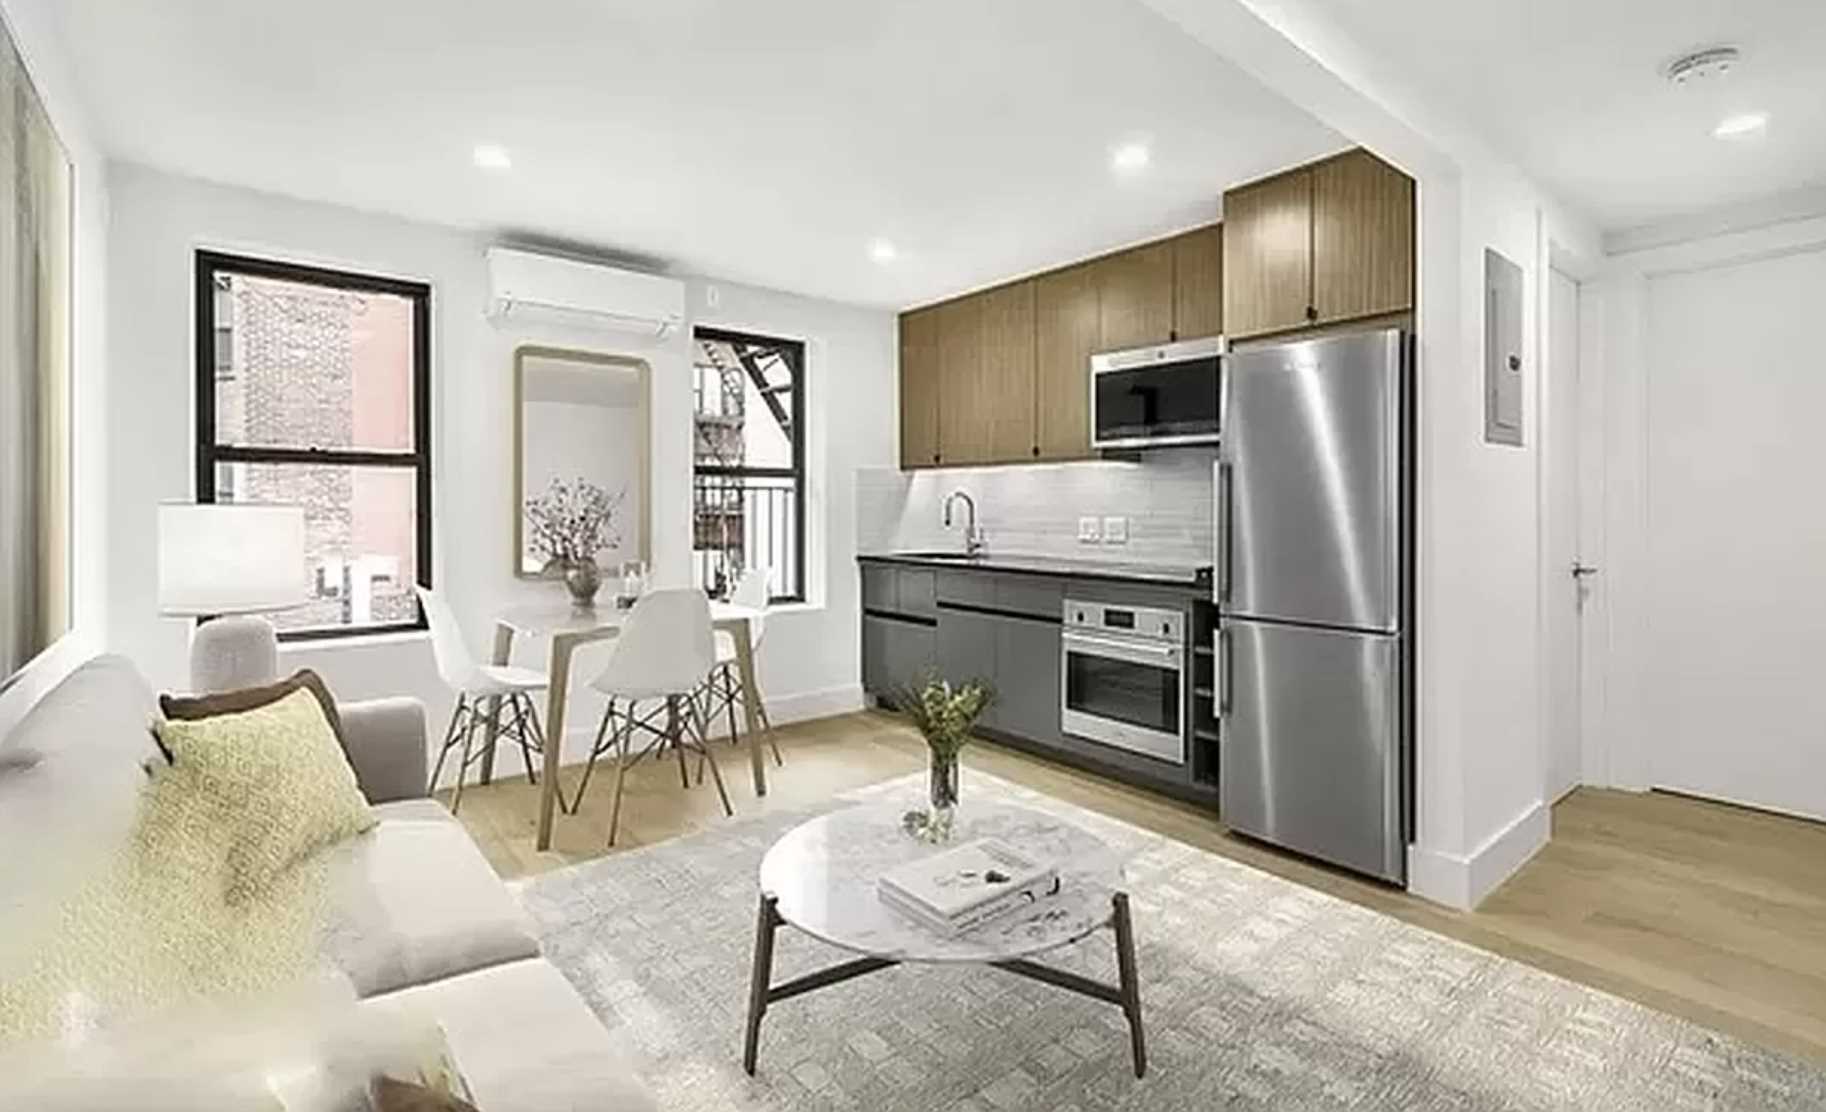 151 Ludlow Street 8, Lower East Side, Downtown, NYC - 2 Bedrooms  
1 Bathrooms  
4 Rooms - 